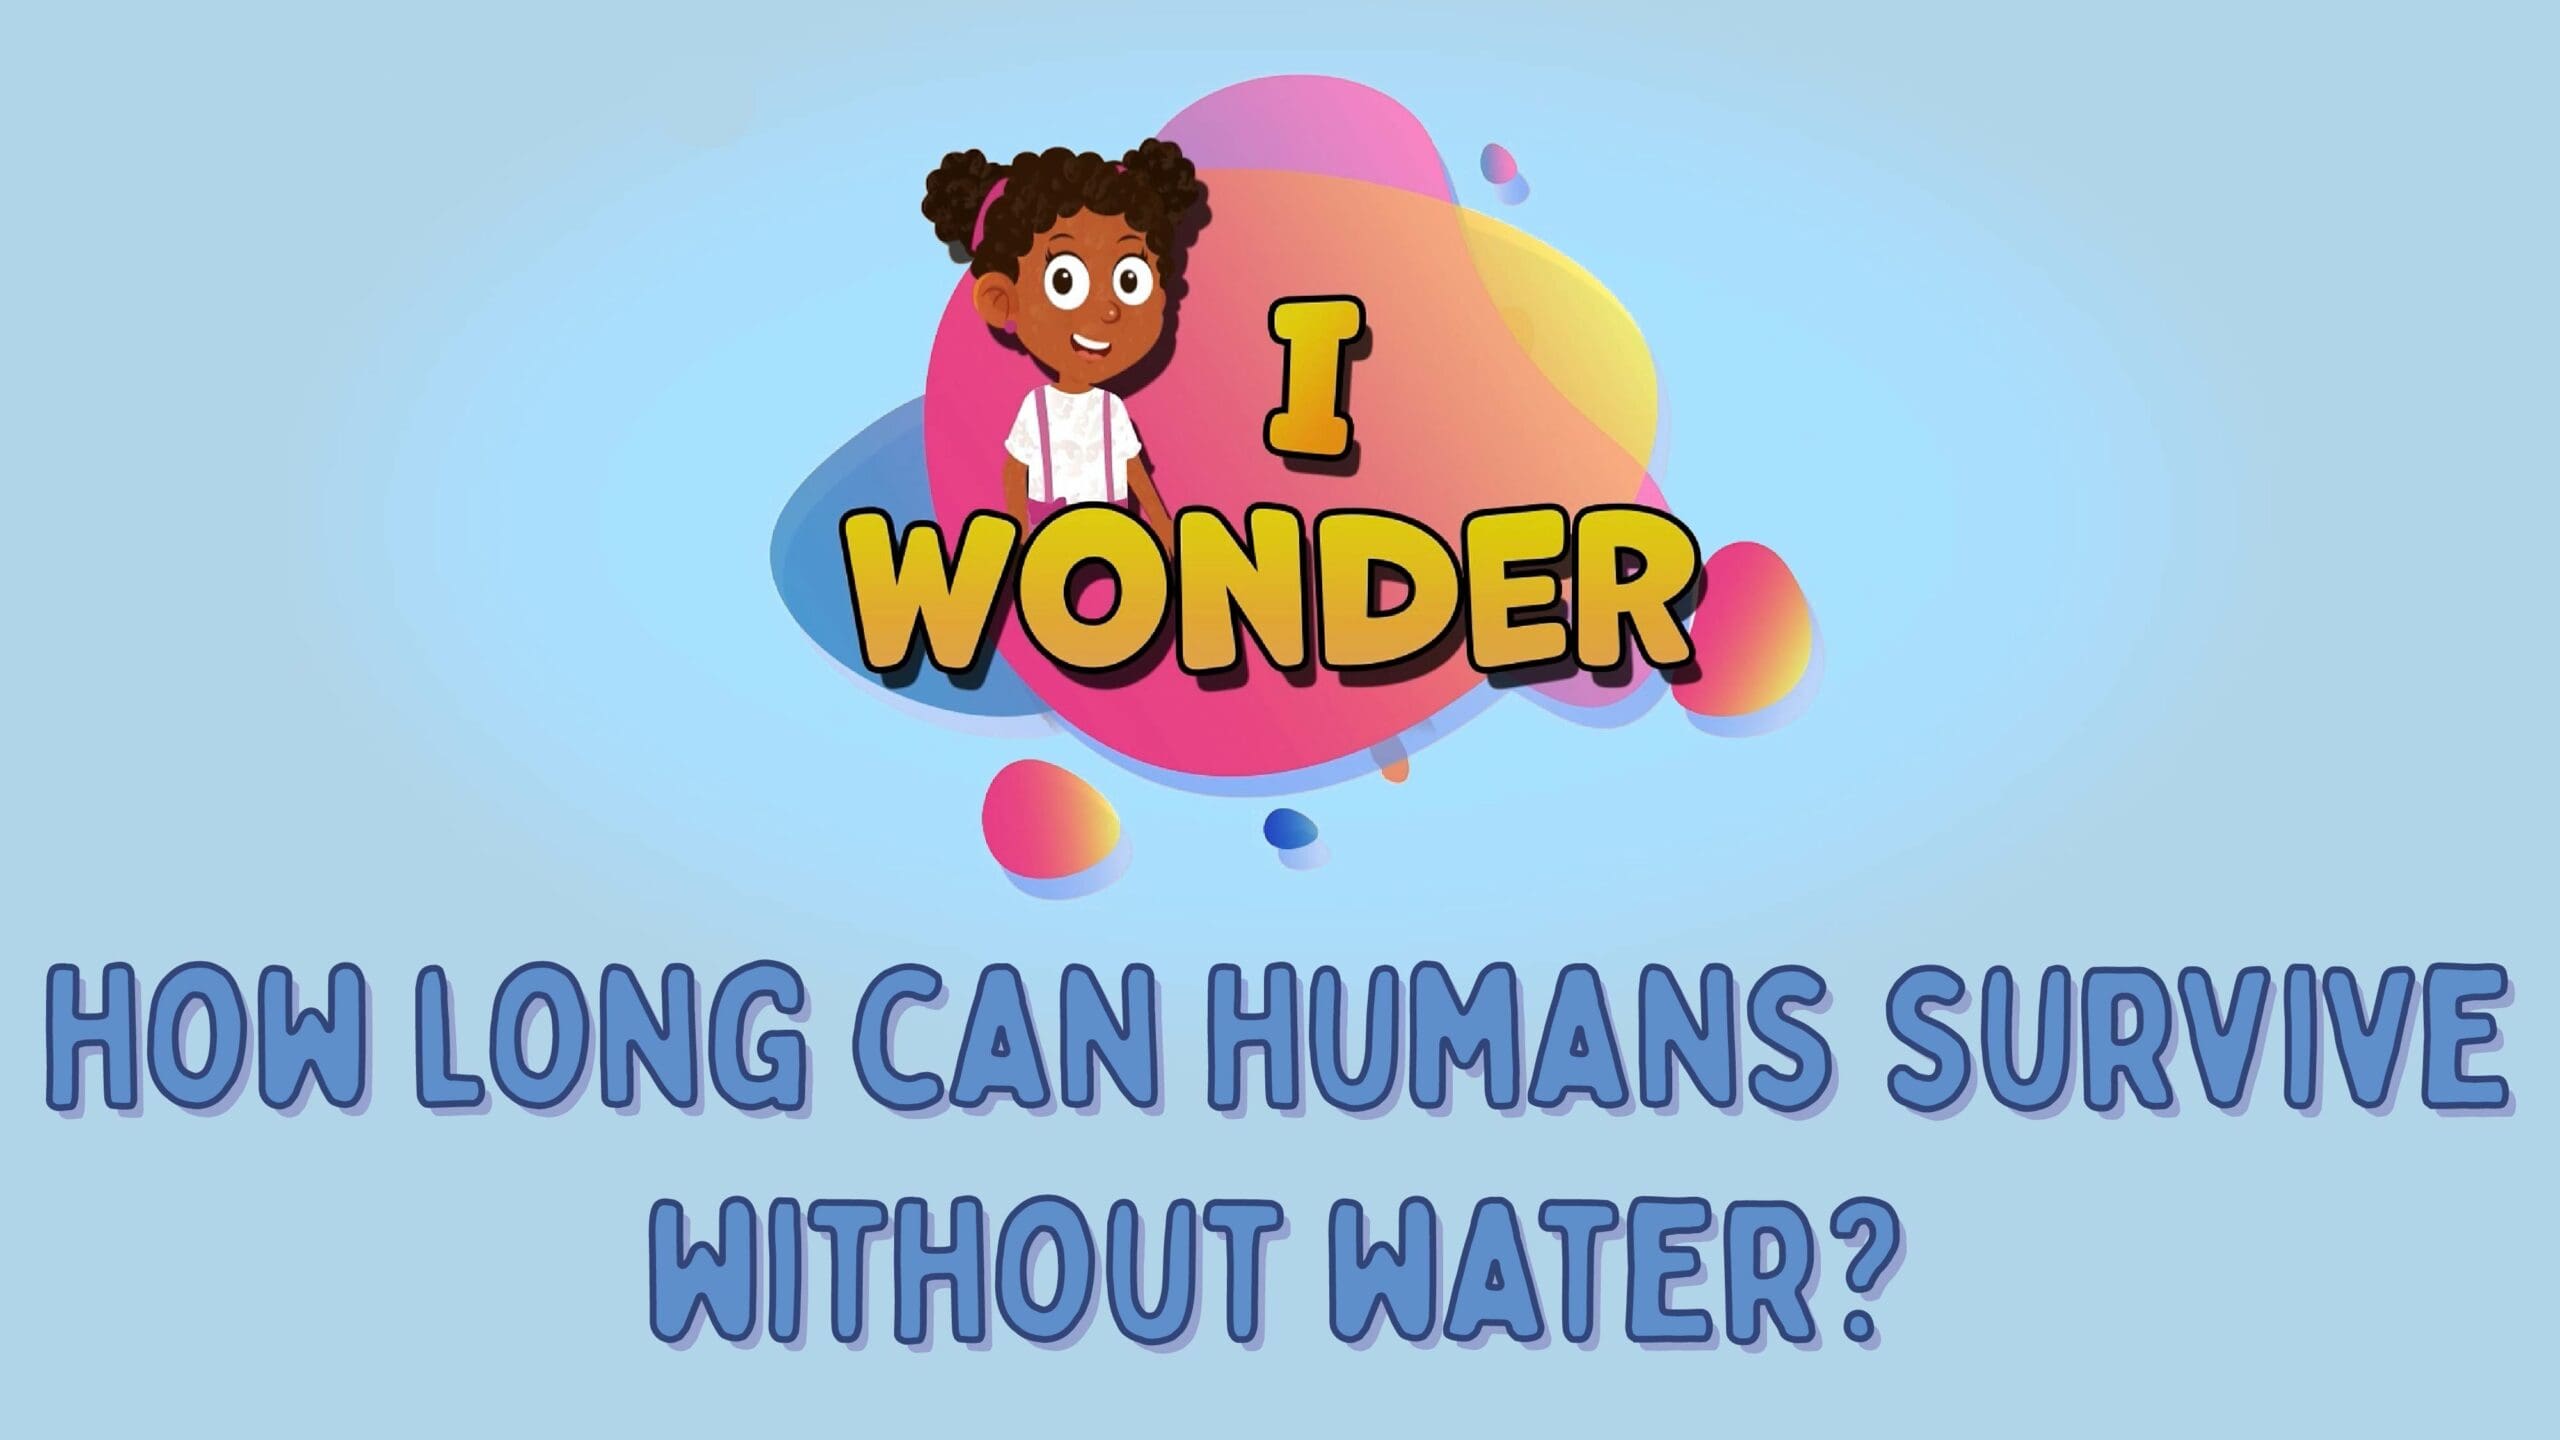 How Long Can Humans Survive Without Water?